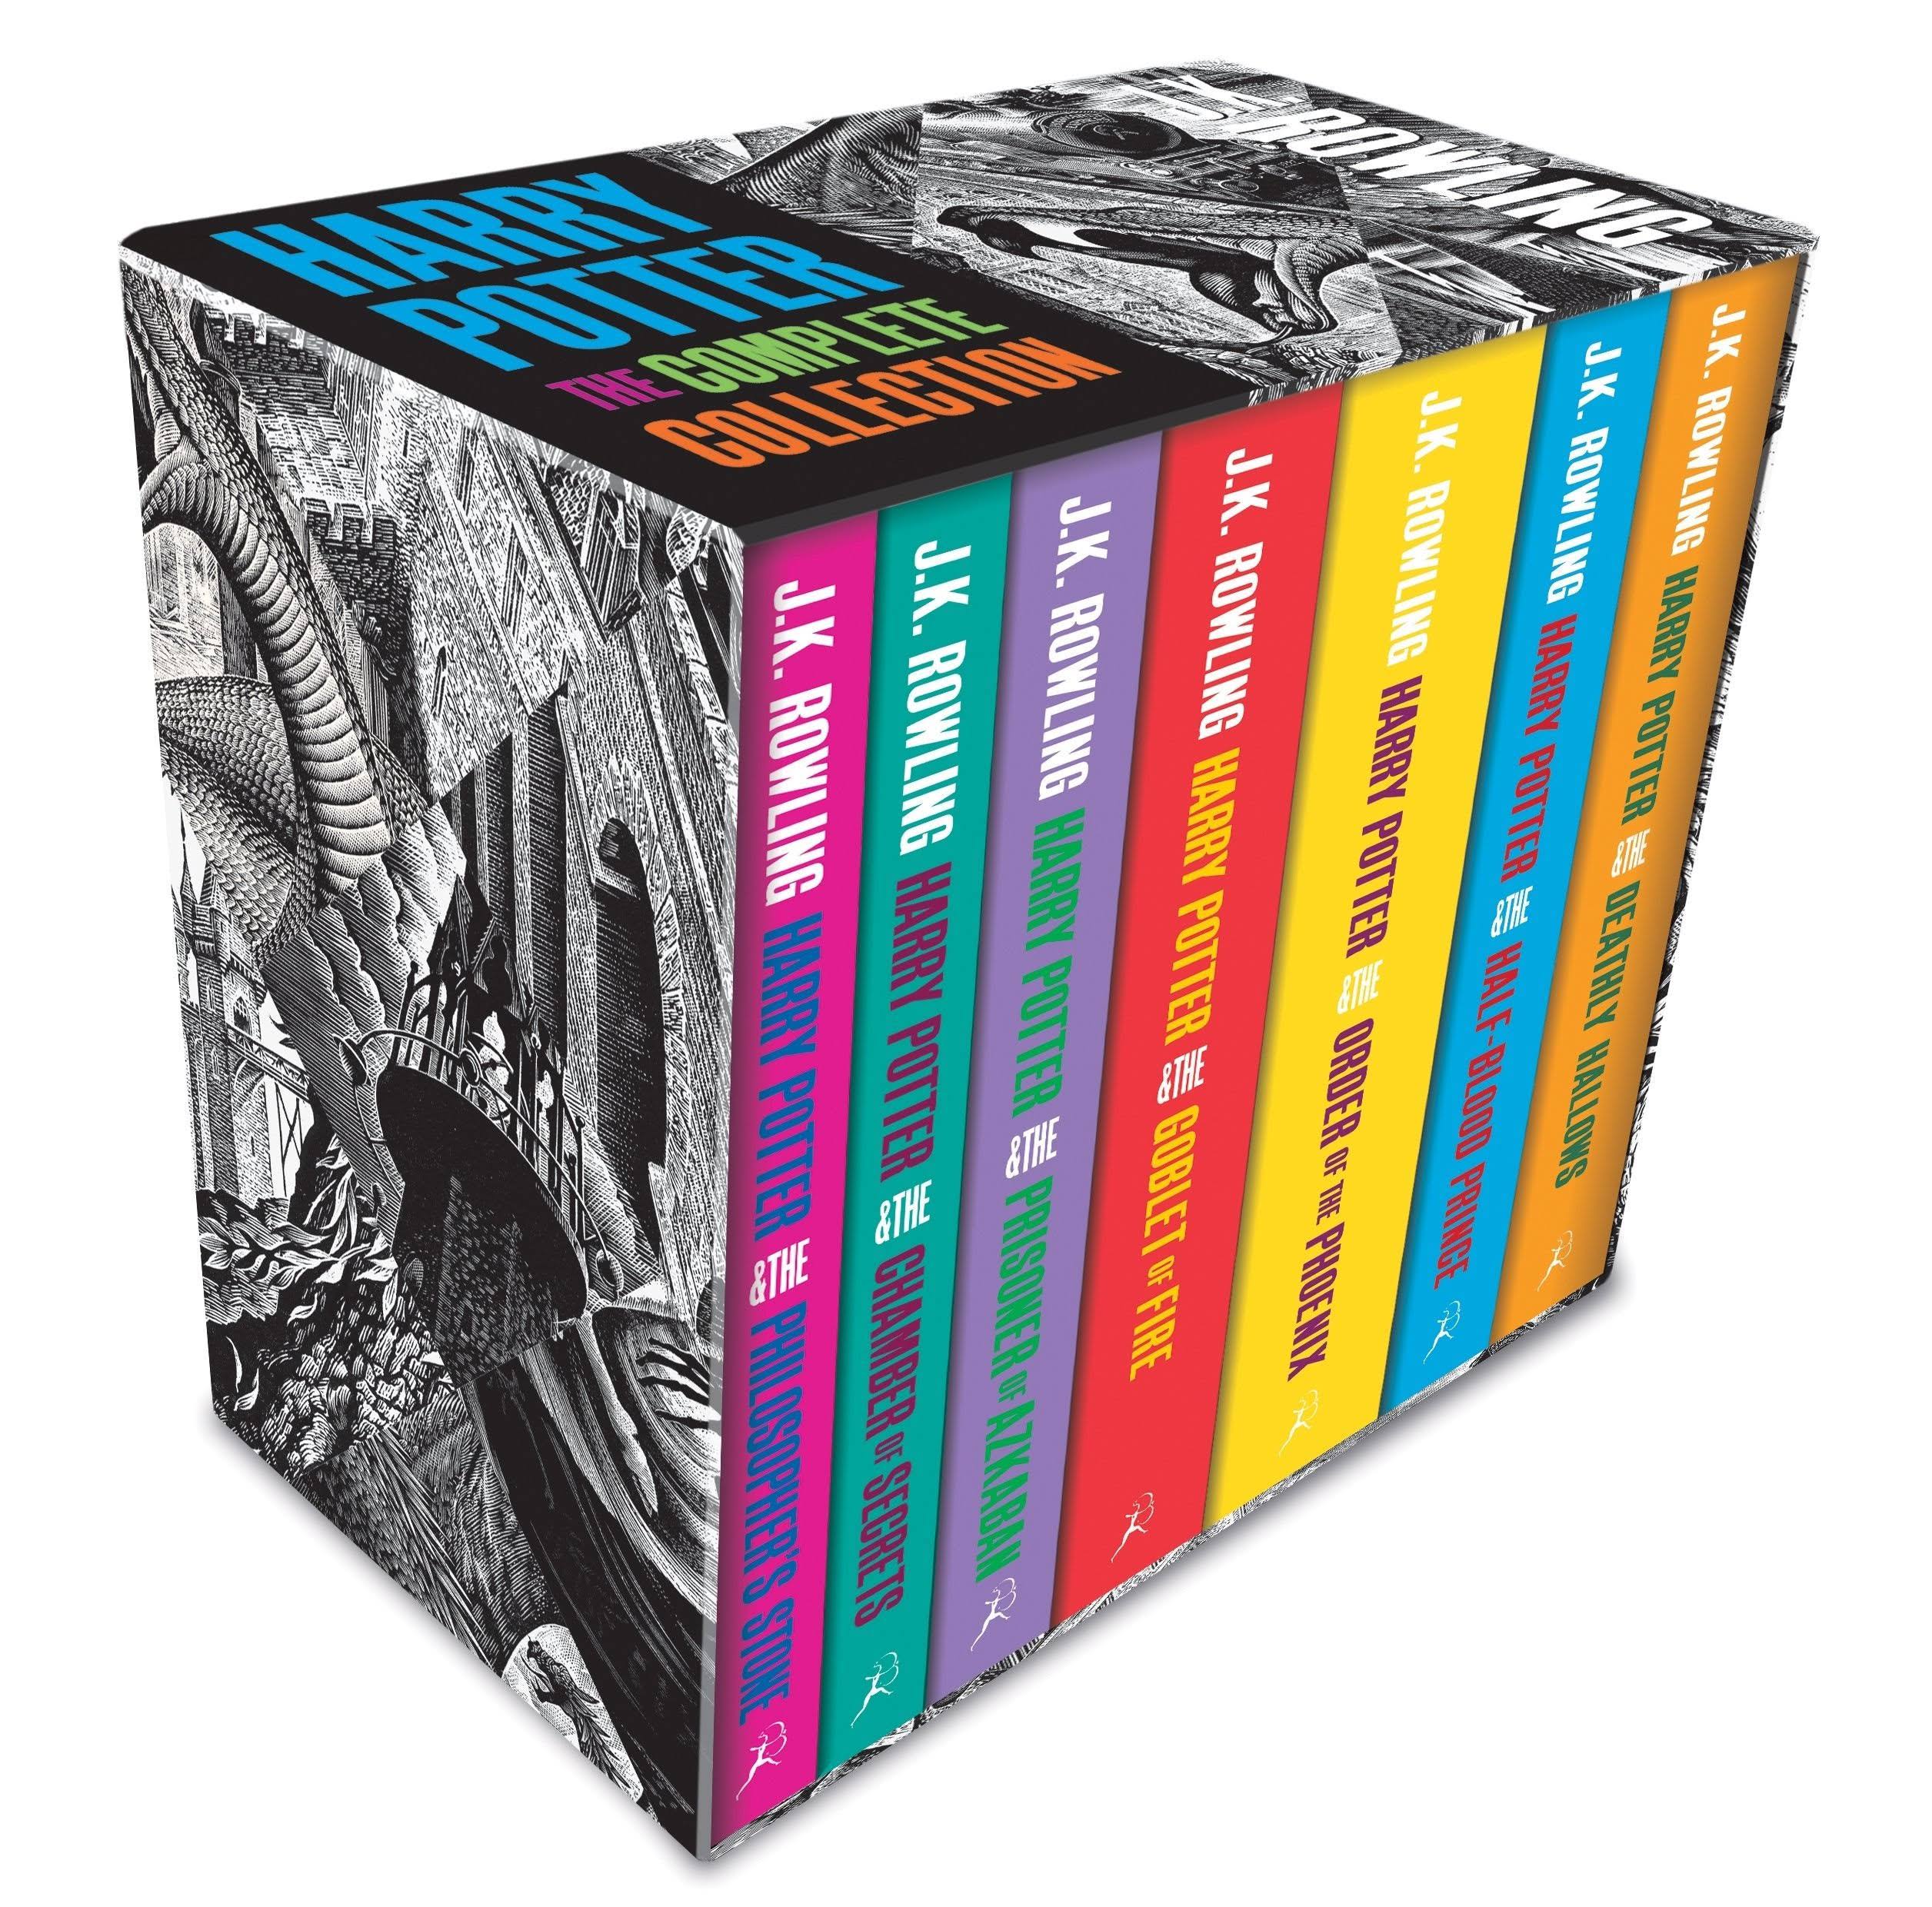 Harry Potter Boxed Set: The Complete Collection (Adult Paperback): Contains: Philosopher's Stone / Chamber of Secrets / Prisoner of Azkaban / Goblet of Fire / Order of the Phoenix / Half-Blood Prince / Deathly Hollows [Book]